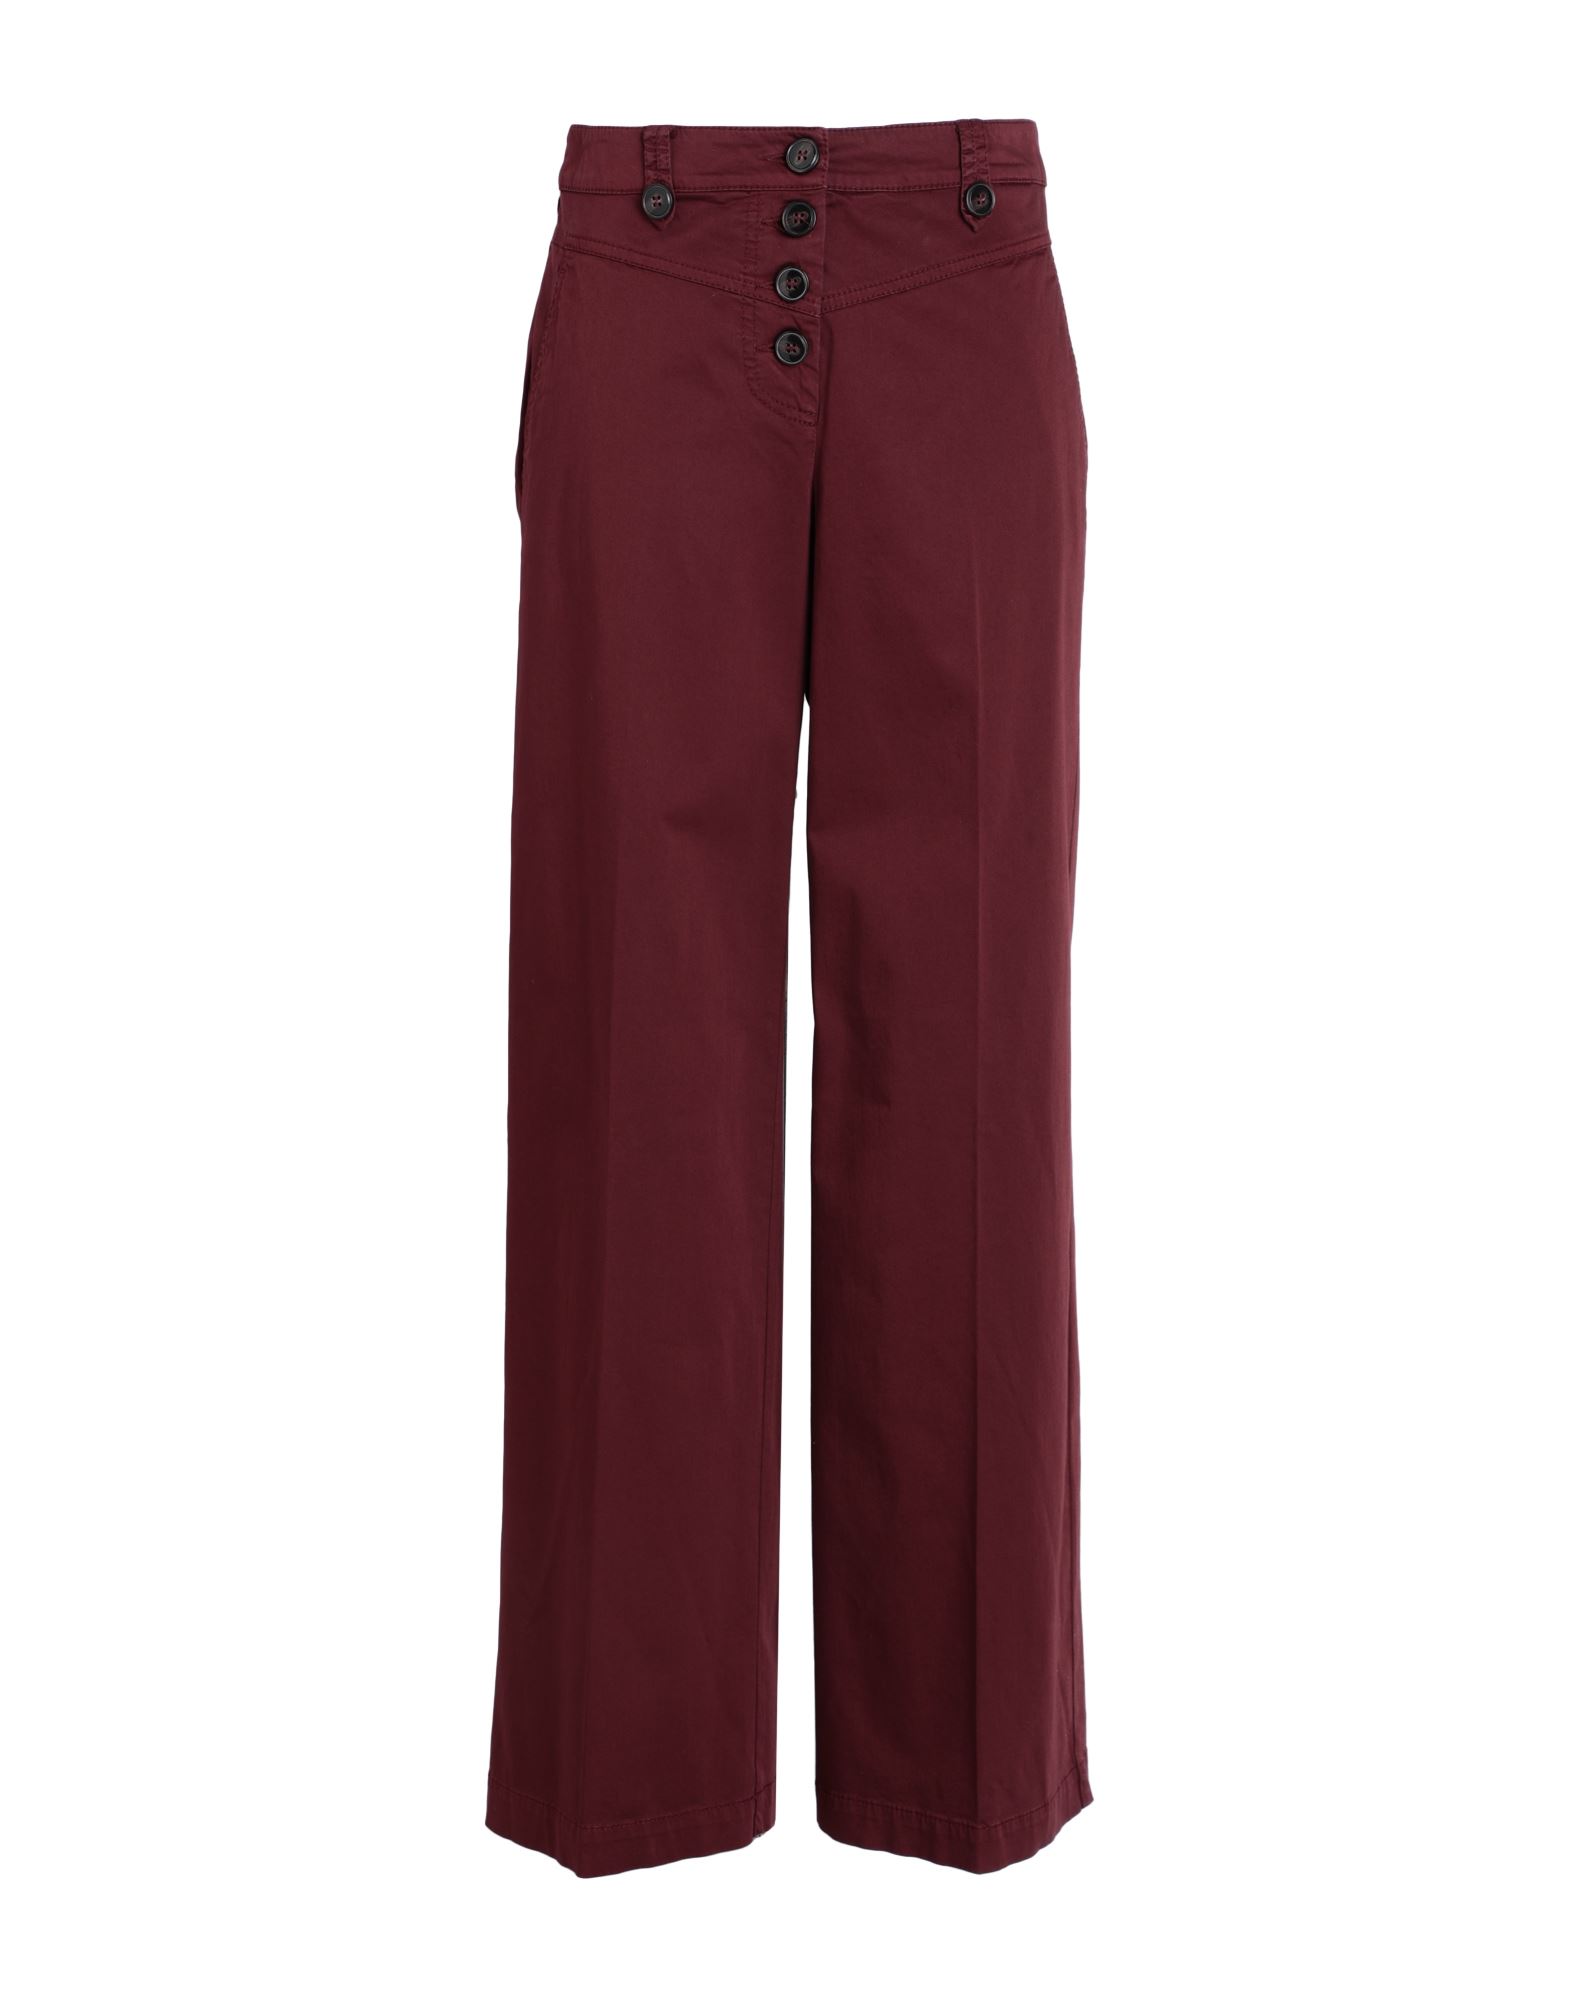 Max & Co . Woman Pants Burgundy Size 4 Cotton, Elastane In Red